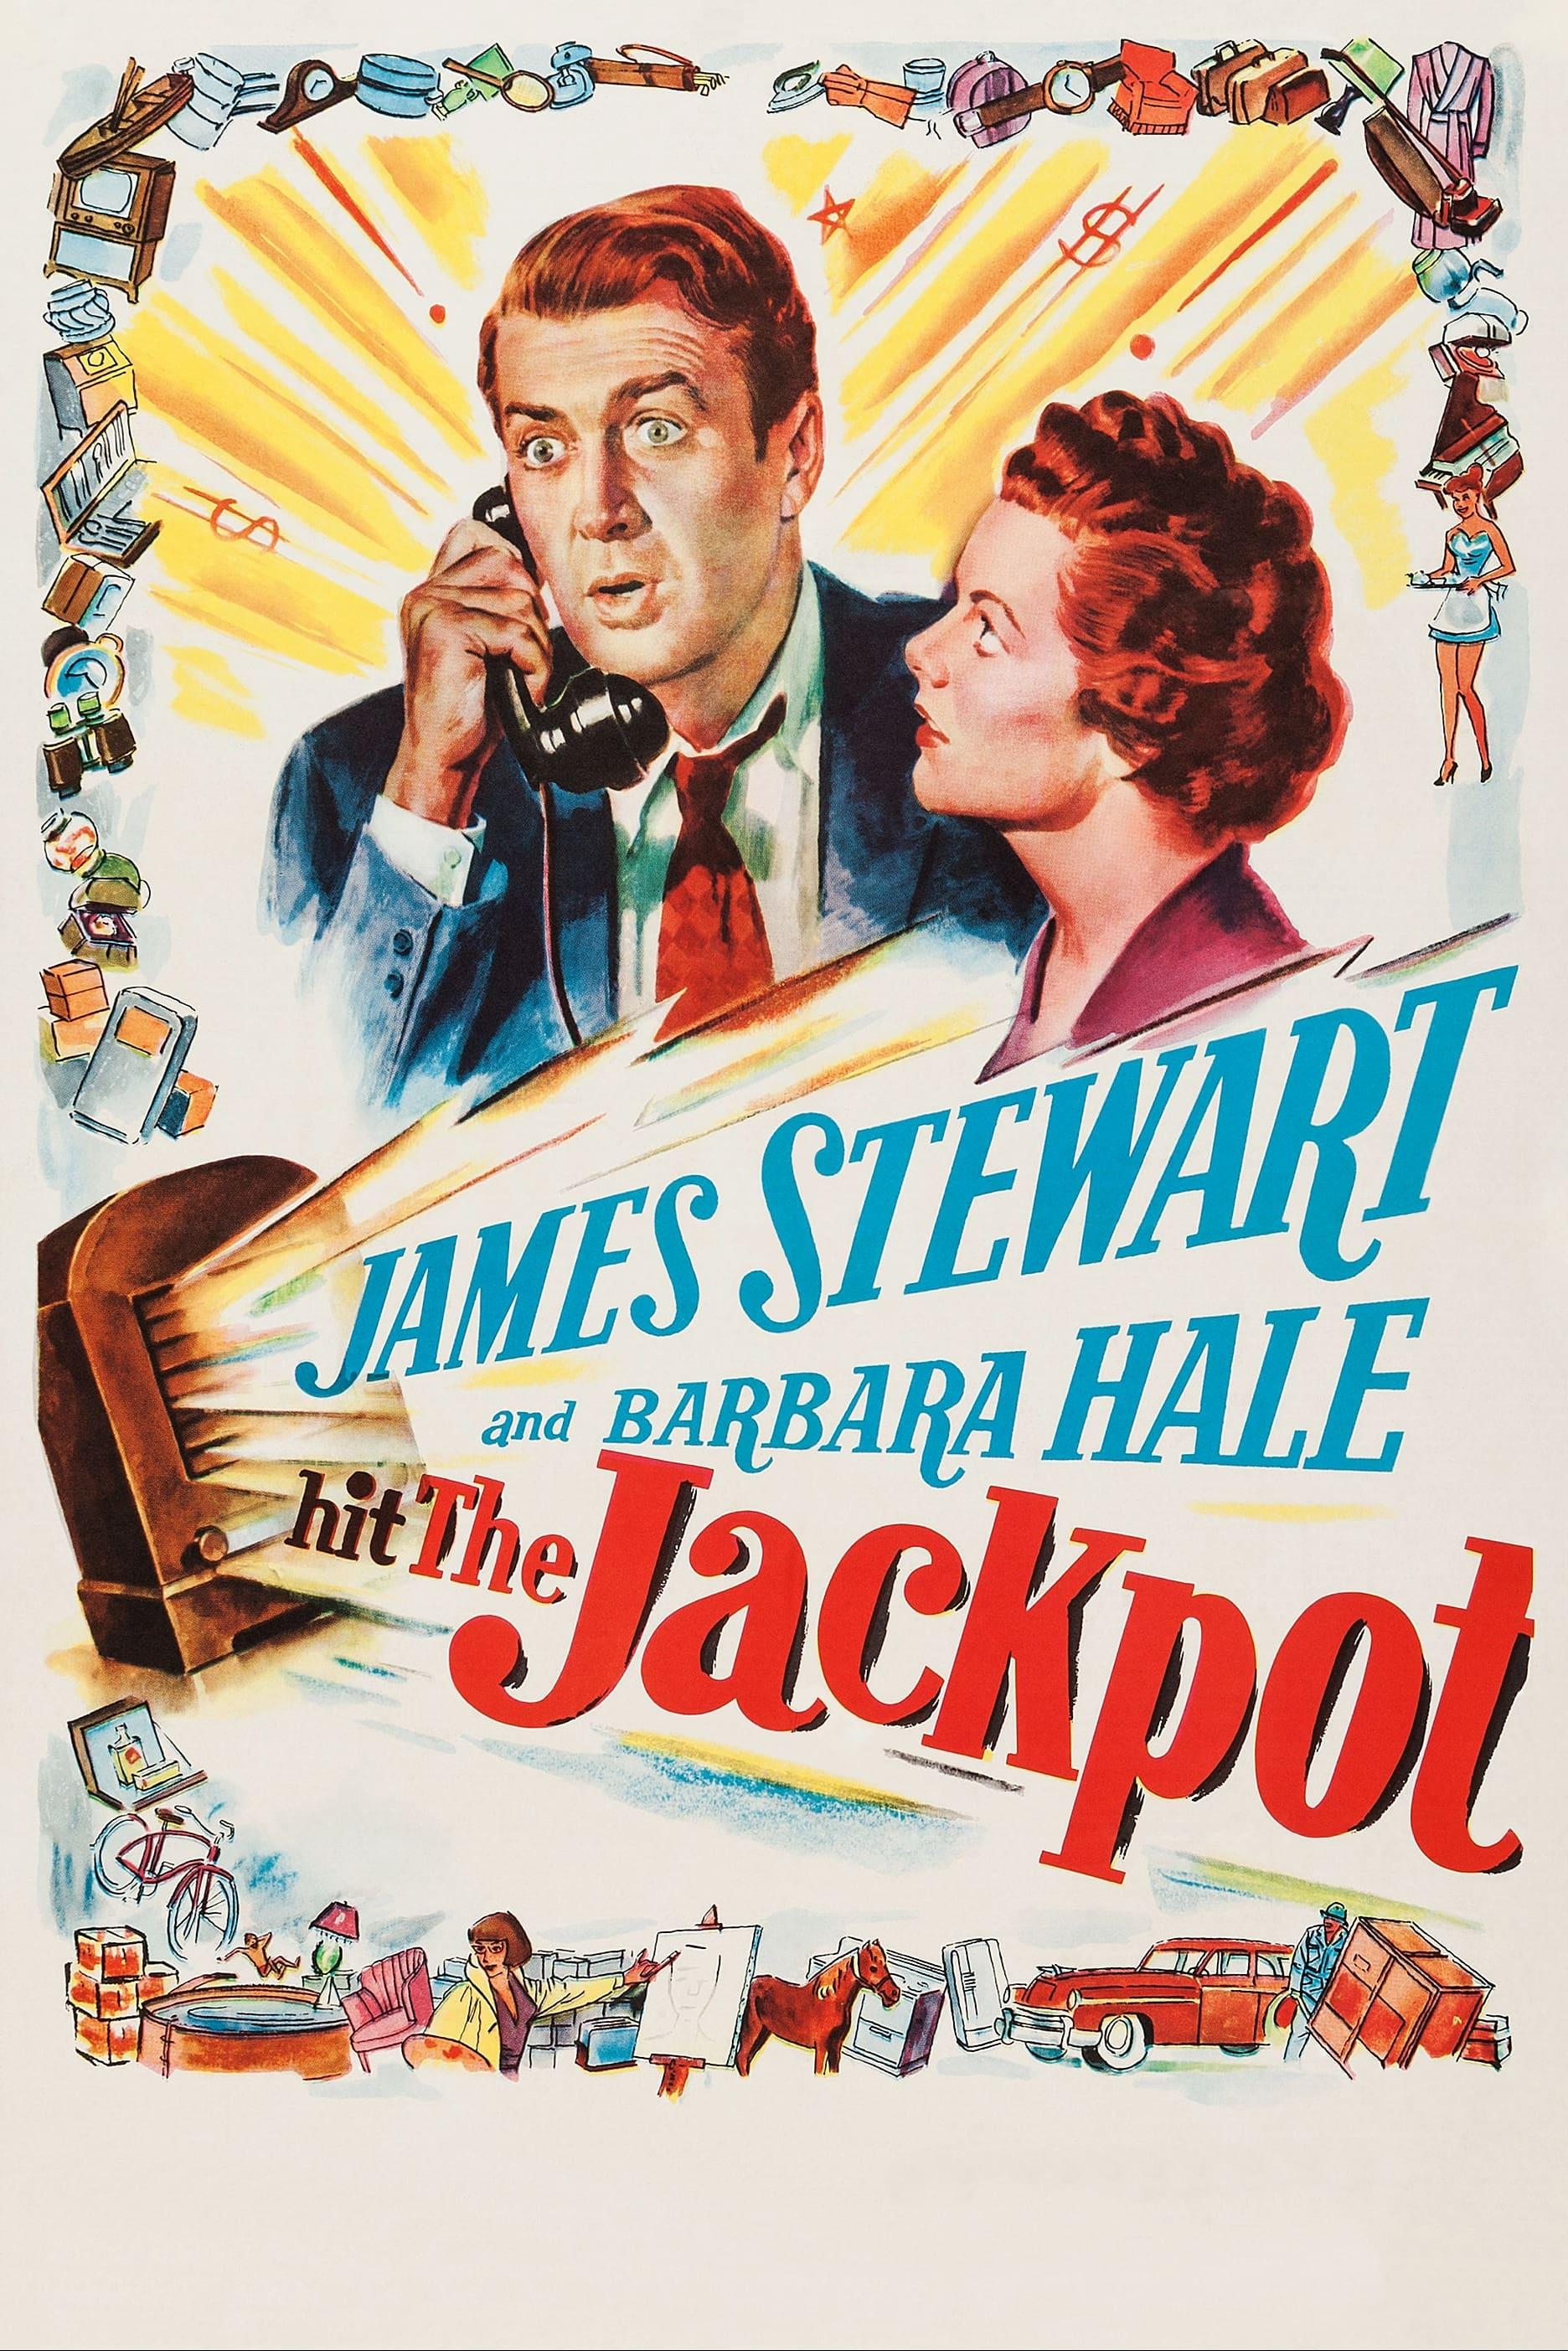 The Jackpot poster